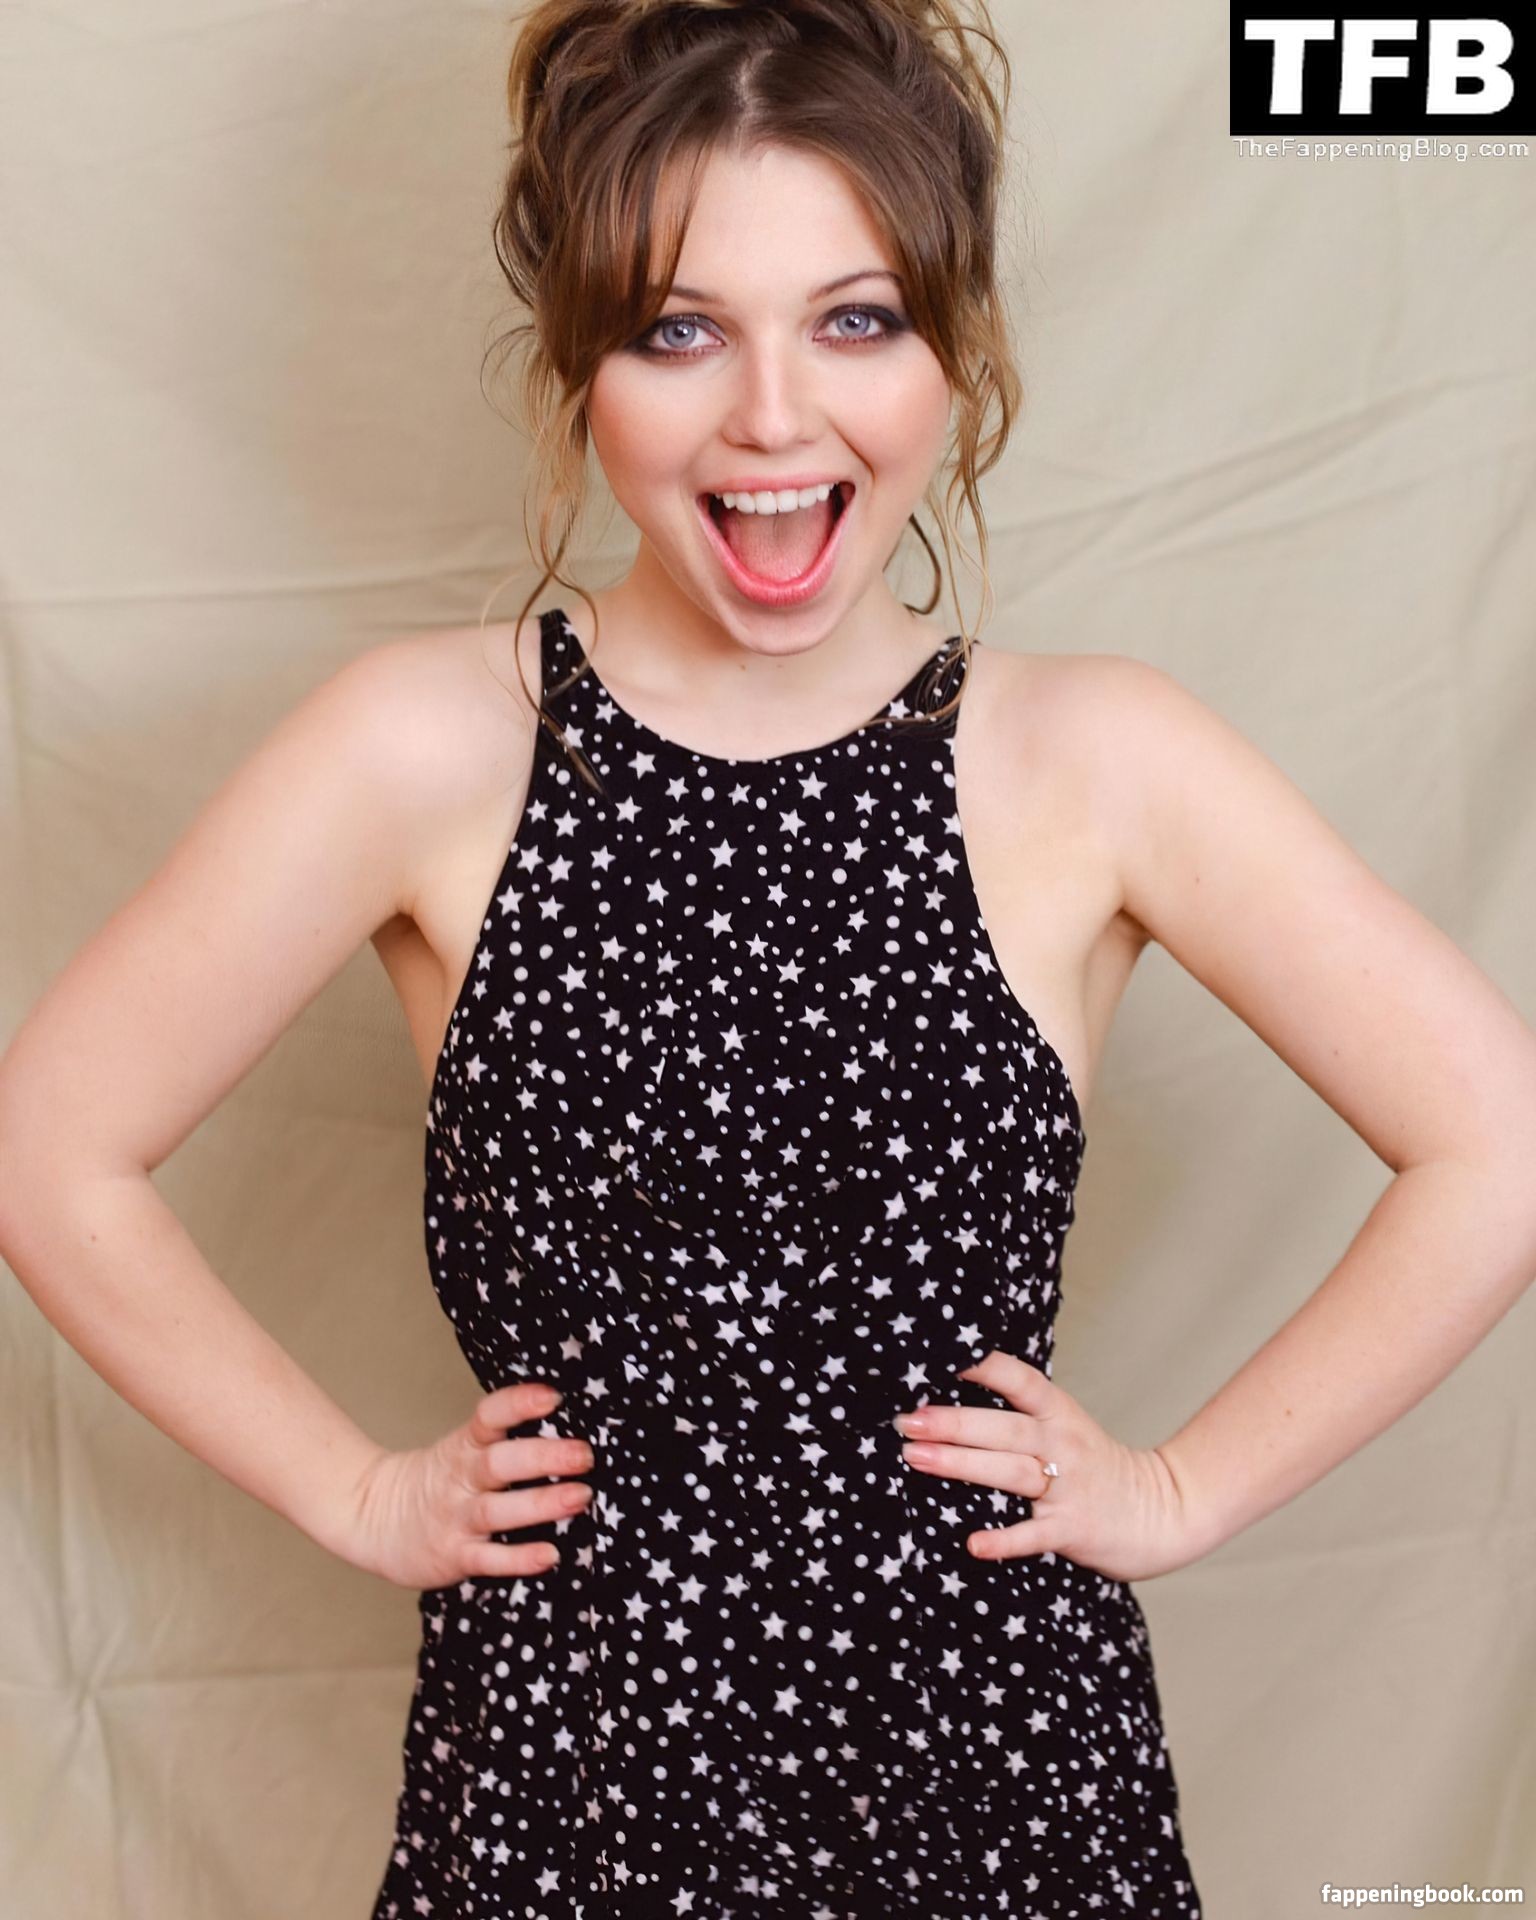 Sammi Hanratty Nude The Fappening Photo 1484188 Fappeningbook